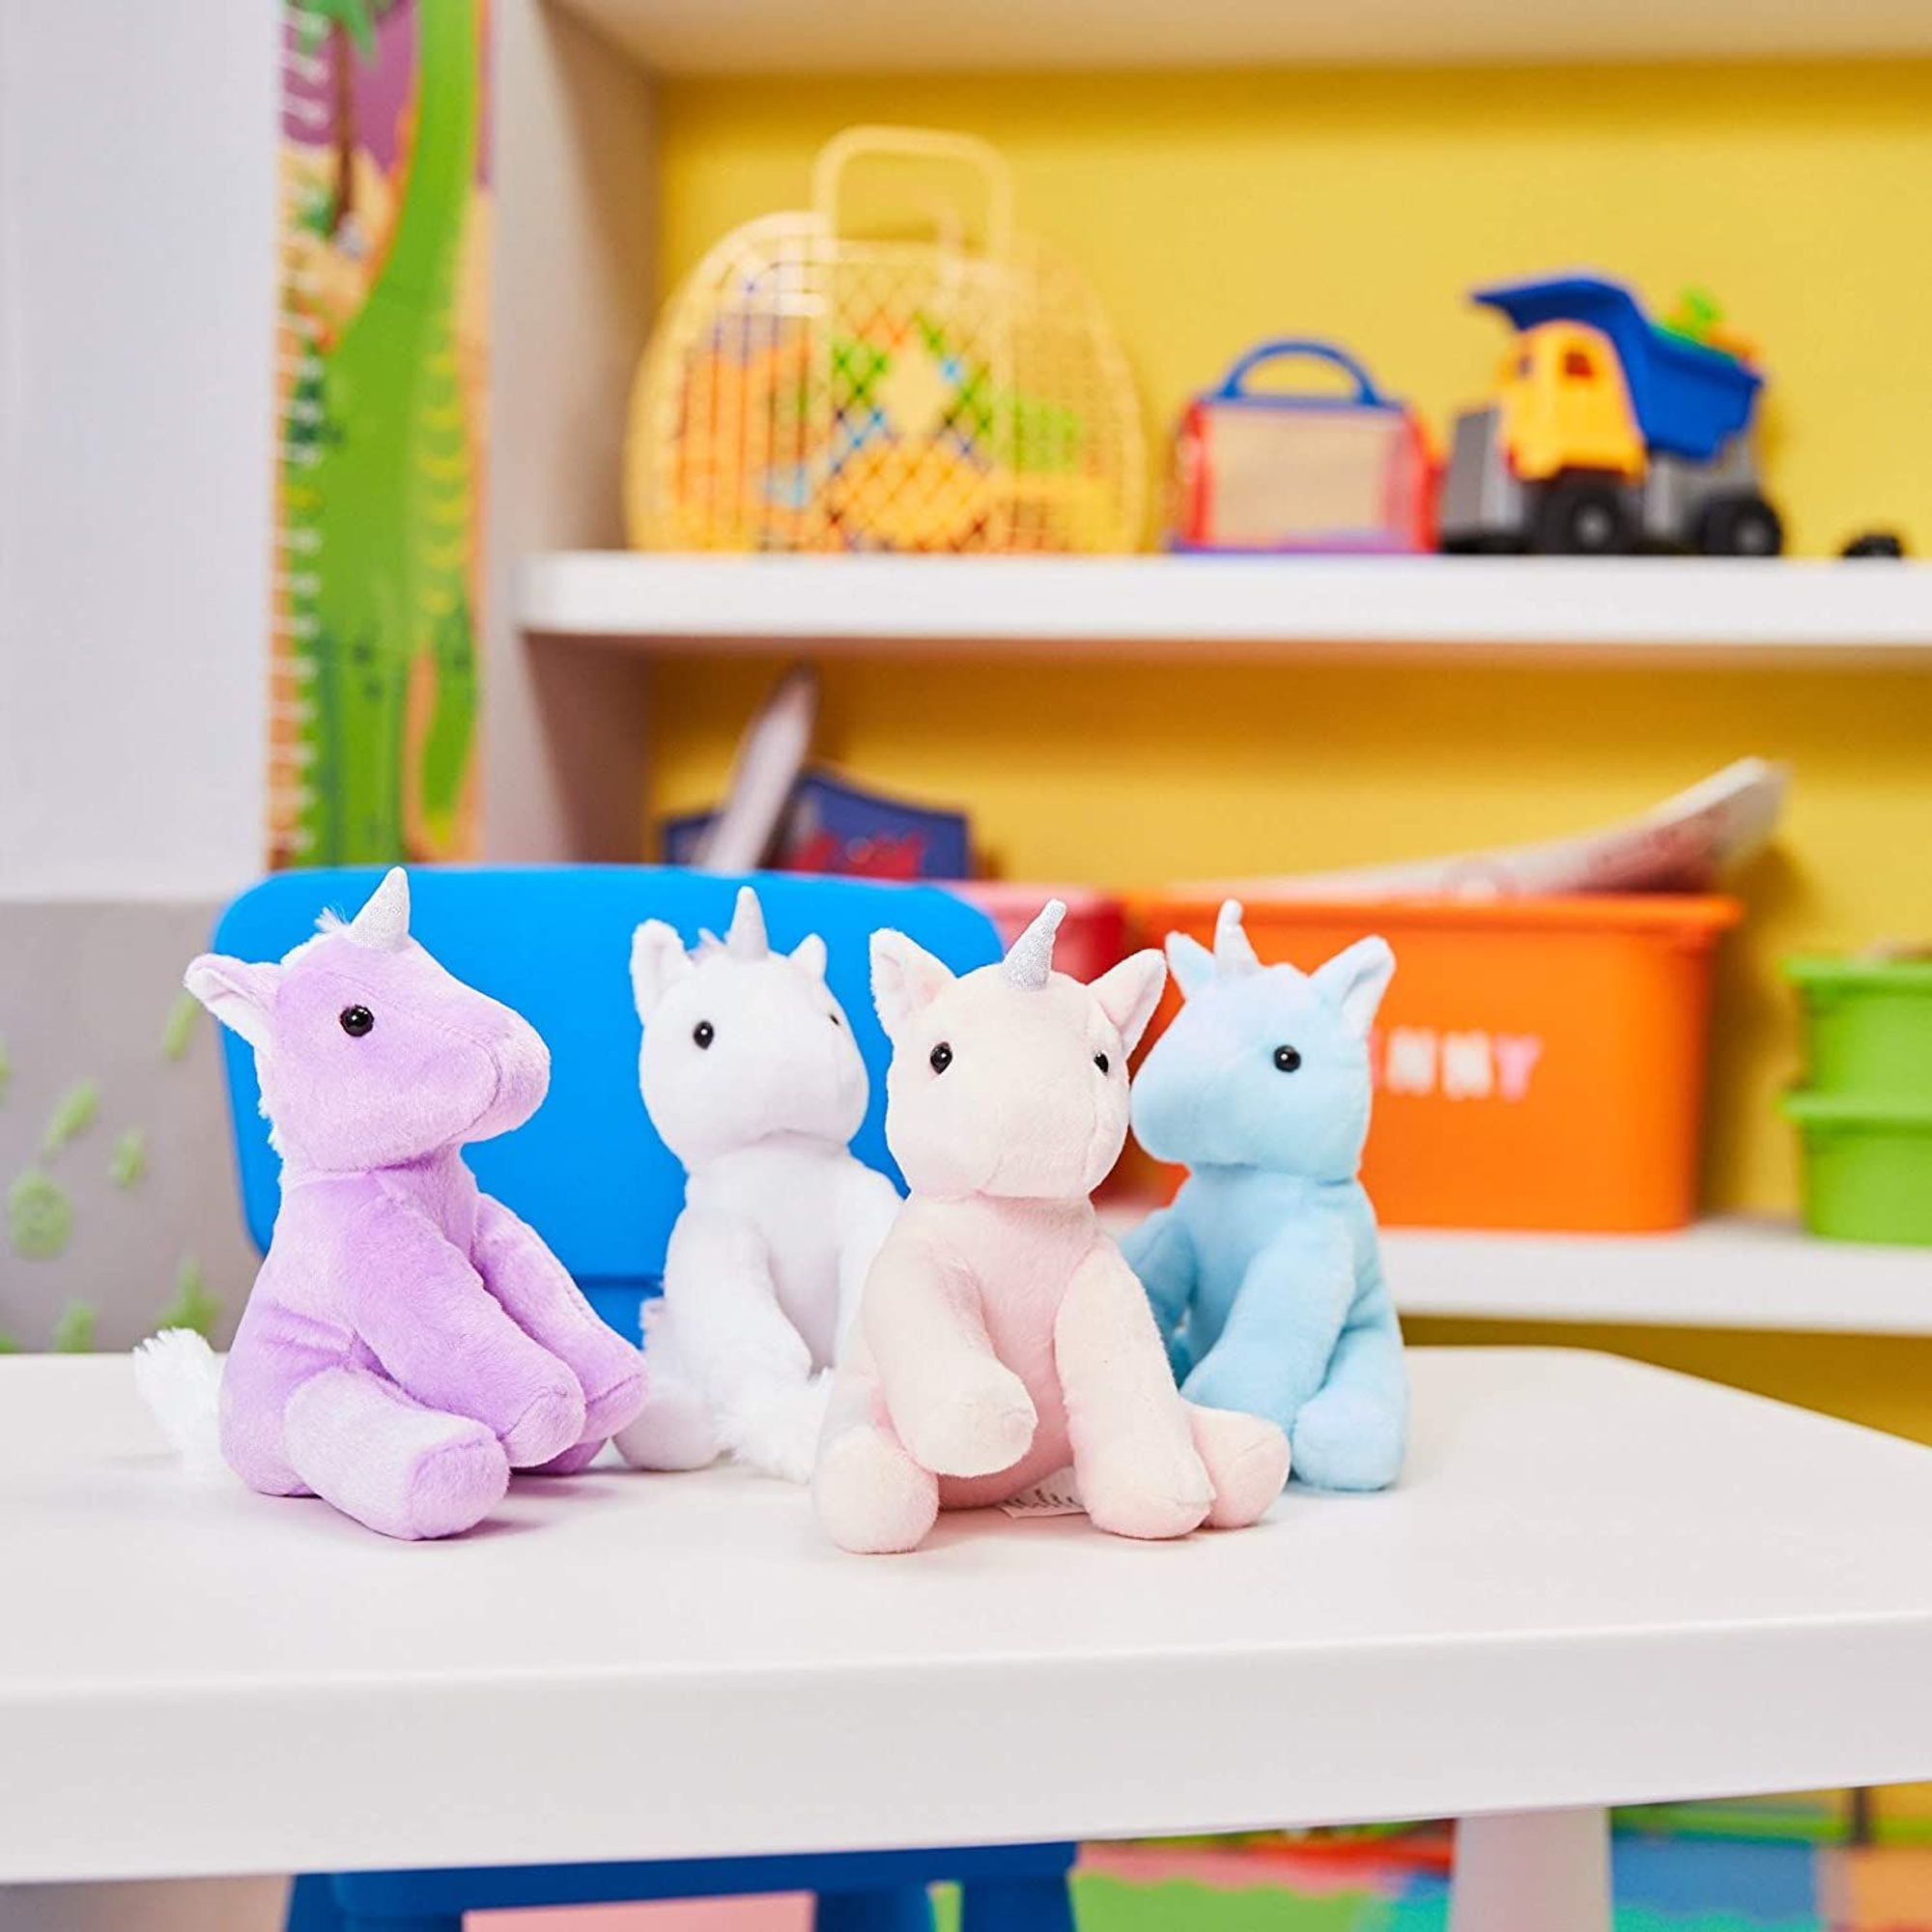 4 Pack Small Unicorn Plush for Girls, 7-inch Stuffed Animal Toys for Kids Birthday Gifts, Pastel Party Favors (4 Colors) - image 2 of 10